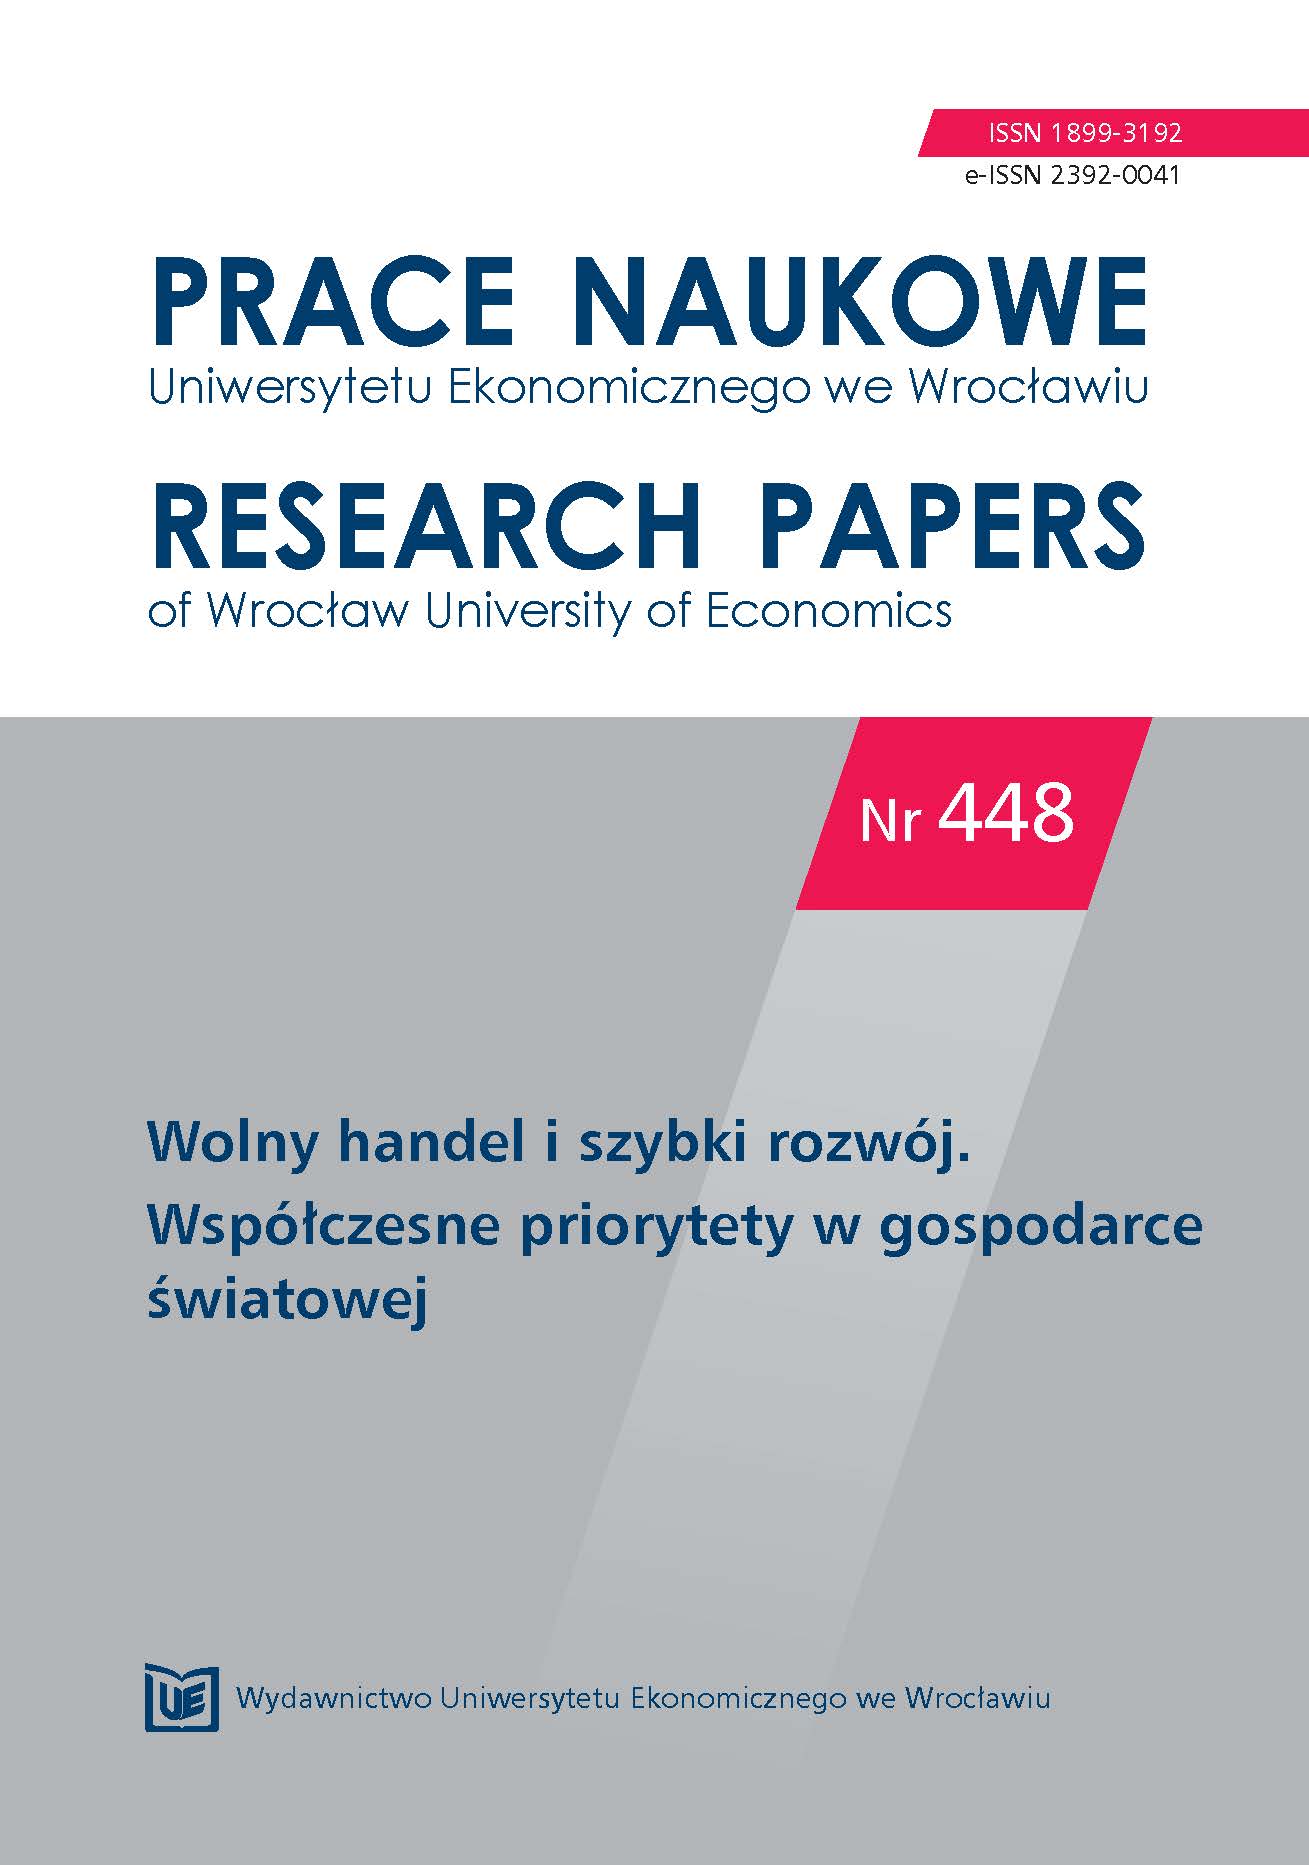 Changes in Poland’s export within the categories of value added Cover Image